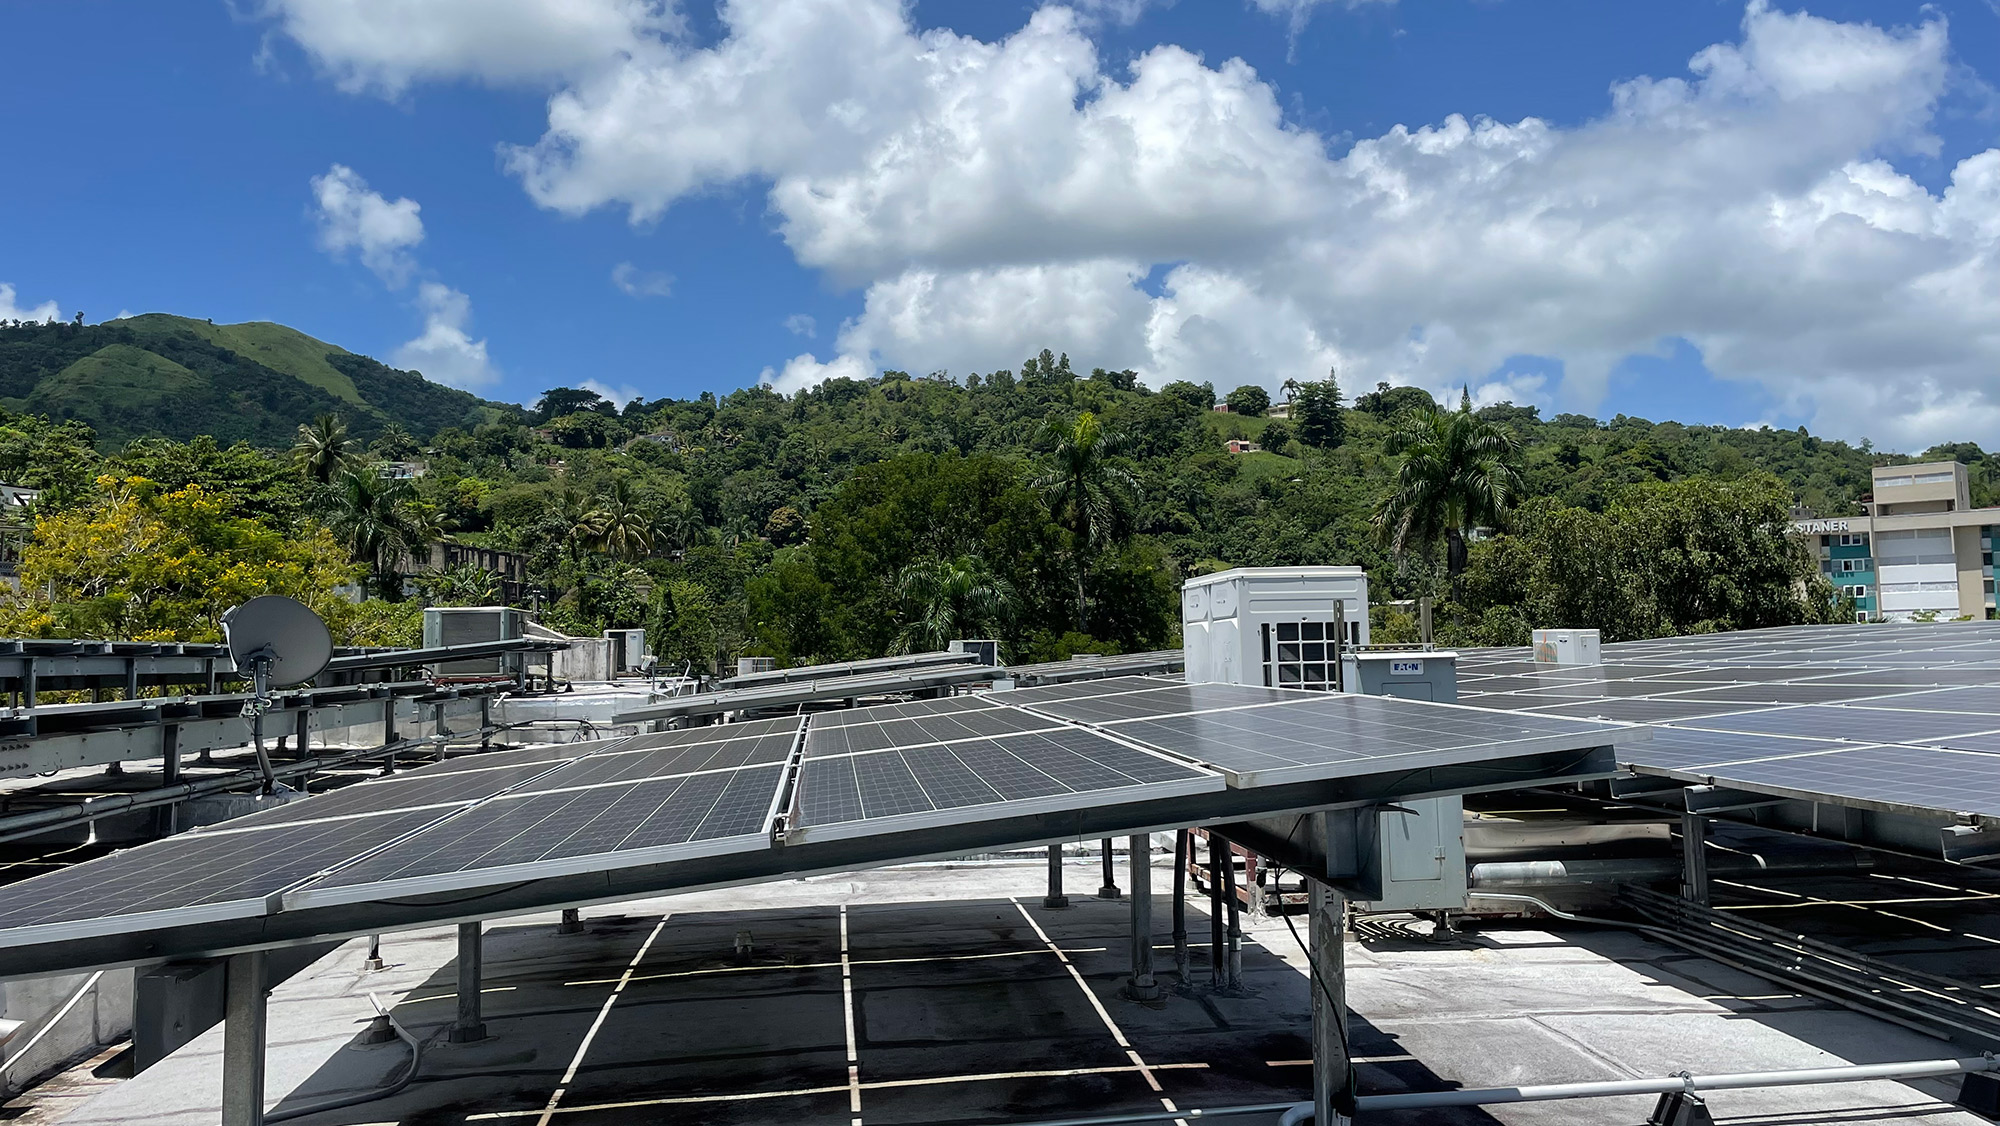 Solar panels on a roof in Puerto Rico.